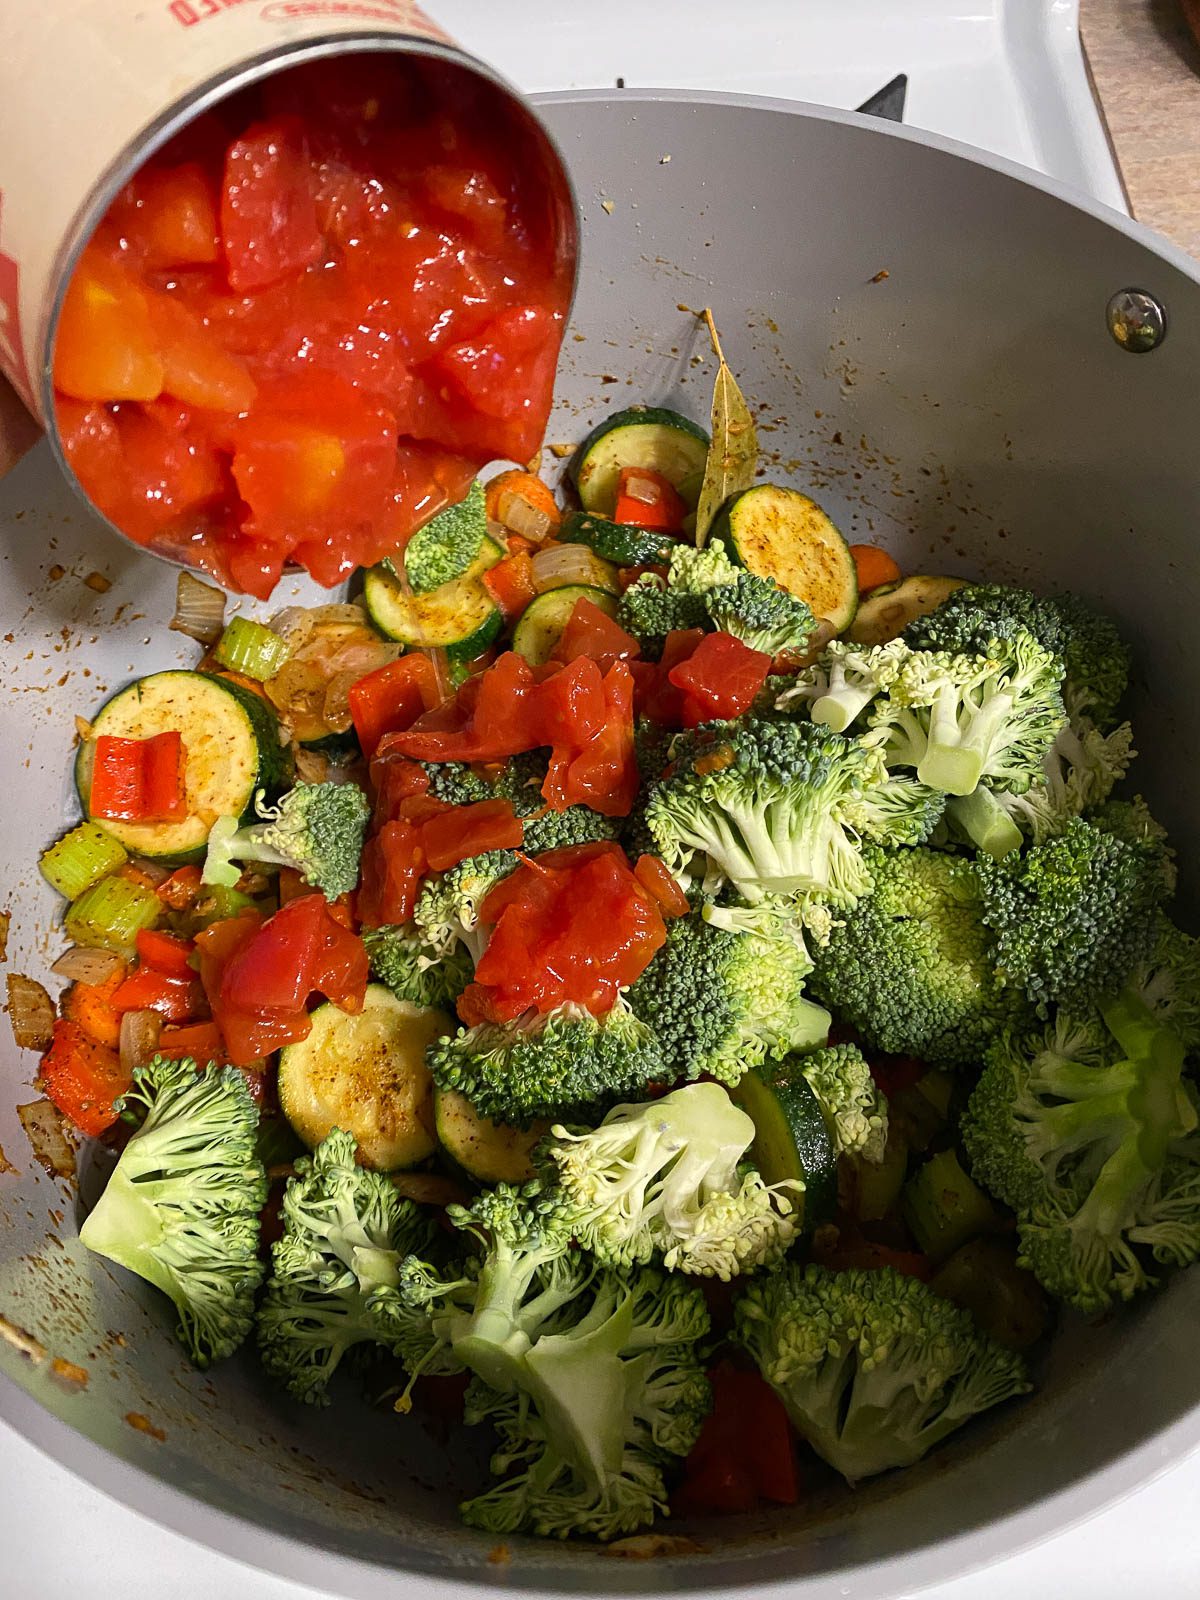 process of adding diced tomatoes to mixed pan of veggies